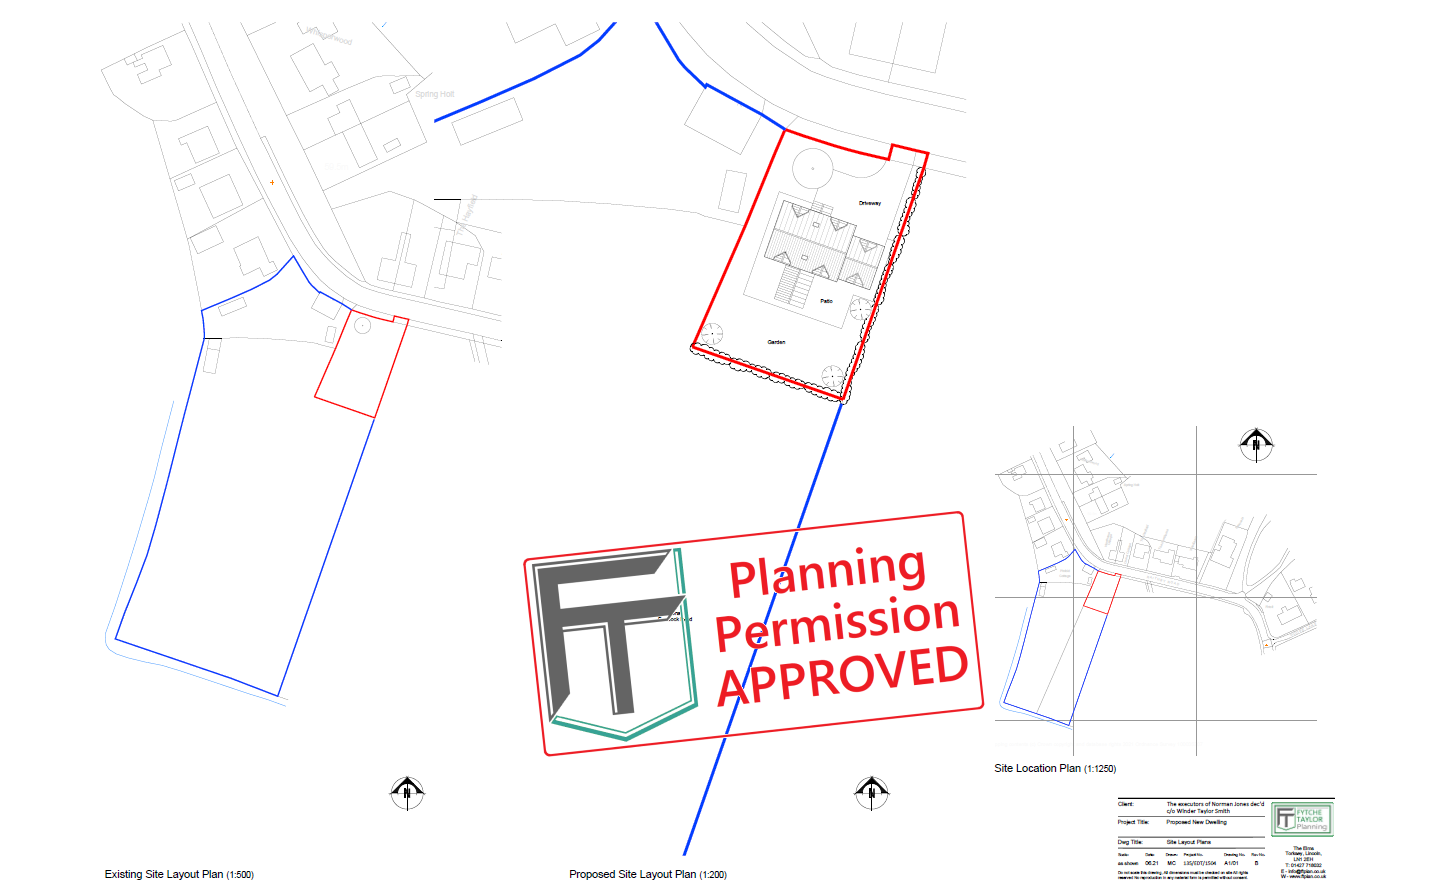 Building plot for sale now - click to view the approved plans. Raithby, Lincolnshire